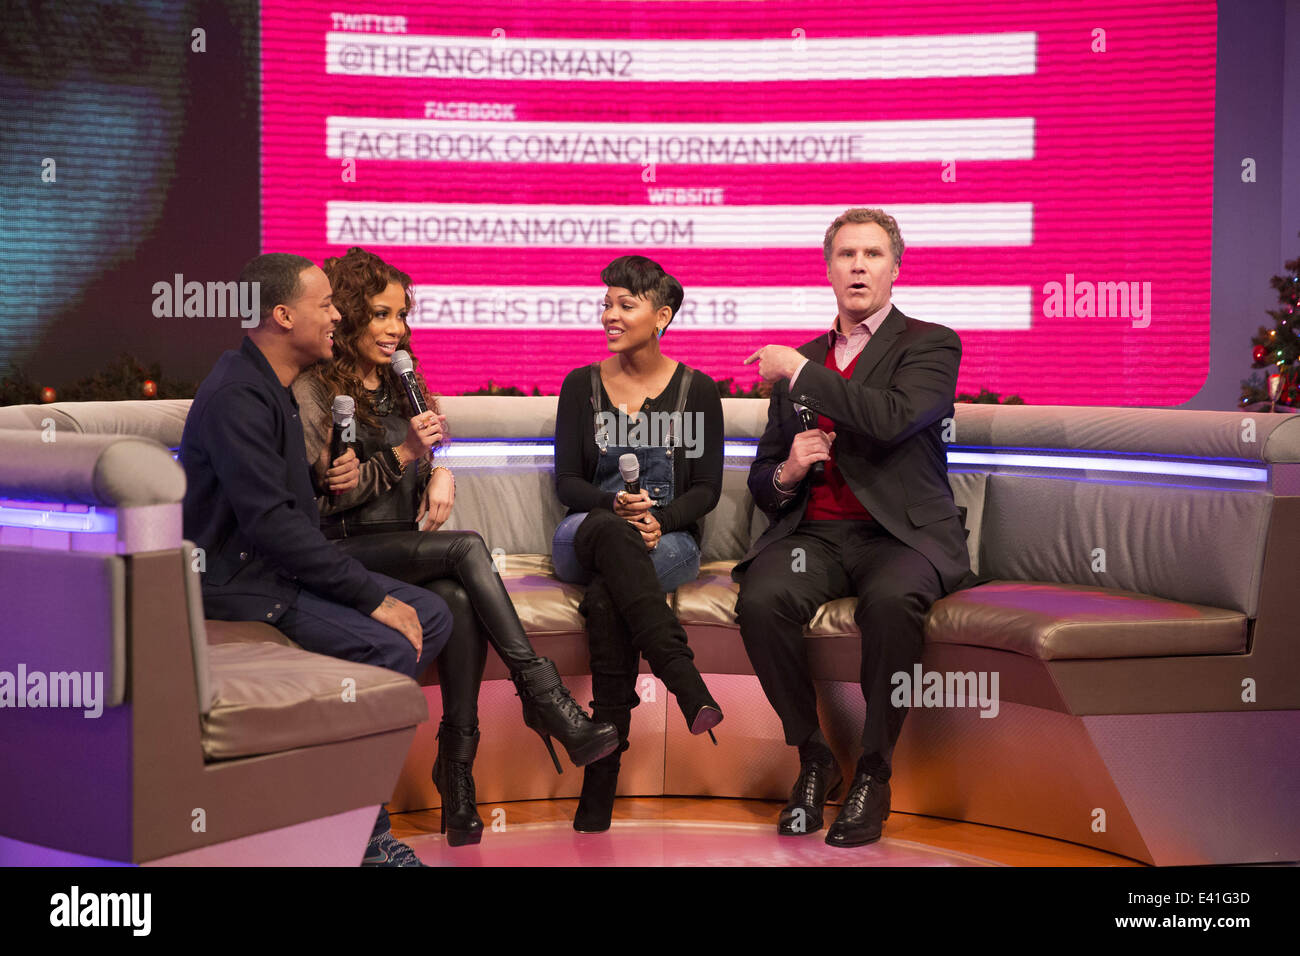 BET's 106 & Park show host guest stars Will Ferrell and Meagan Good to promote new movie Anchorman II  Featuring: Bow Wow,Keshia Chanté,Meagan Good,Will Ferrell Where: New York, New York, United States When: 17 Dec 2013 Stock Photo